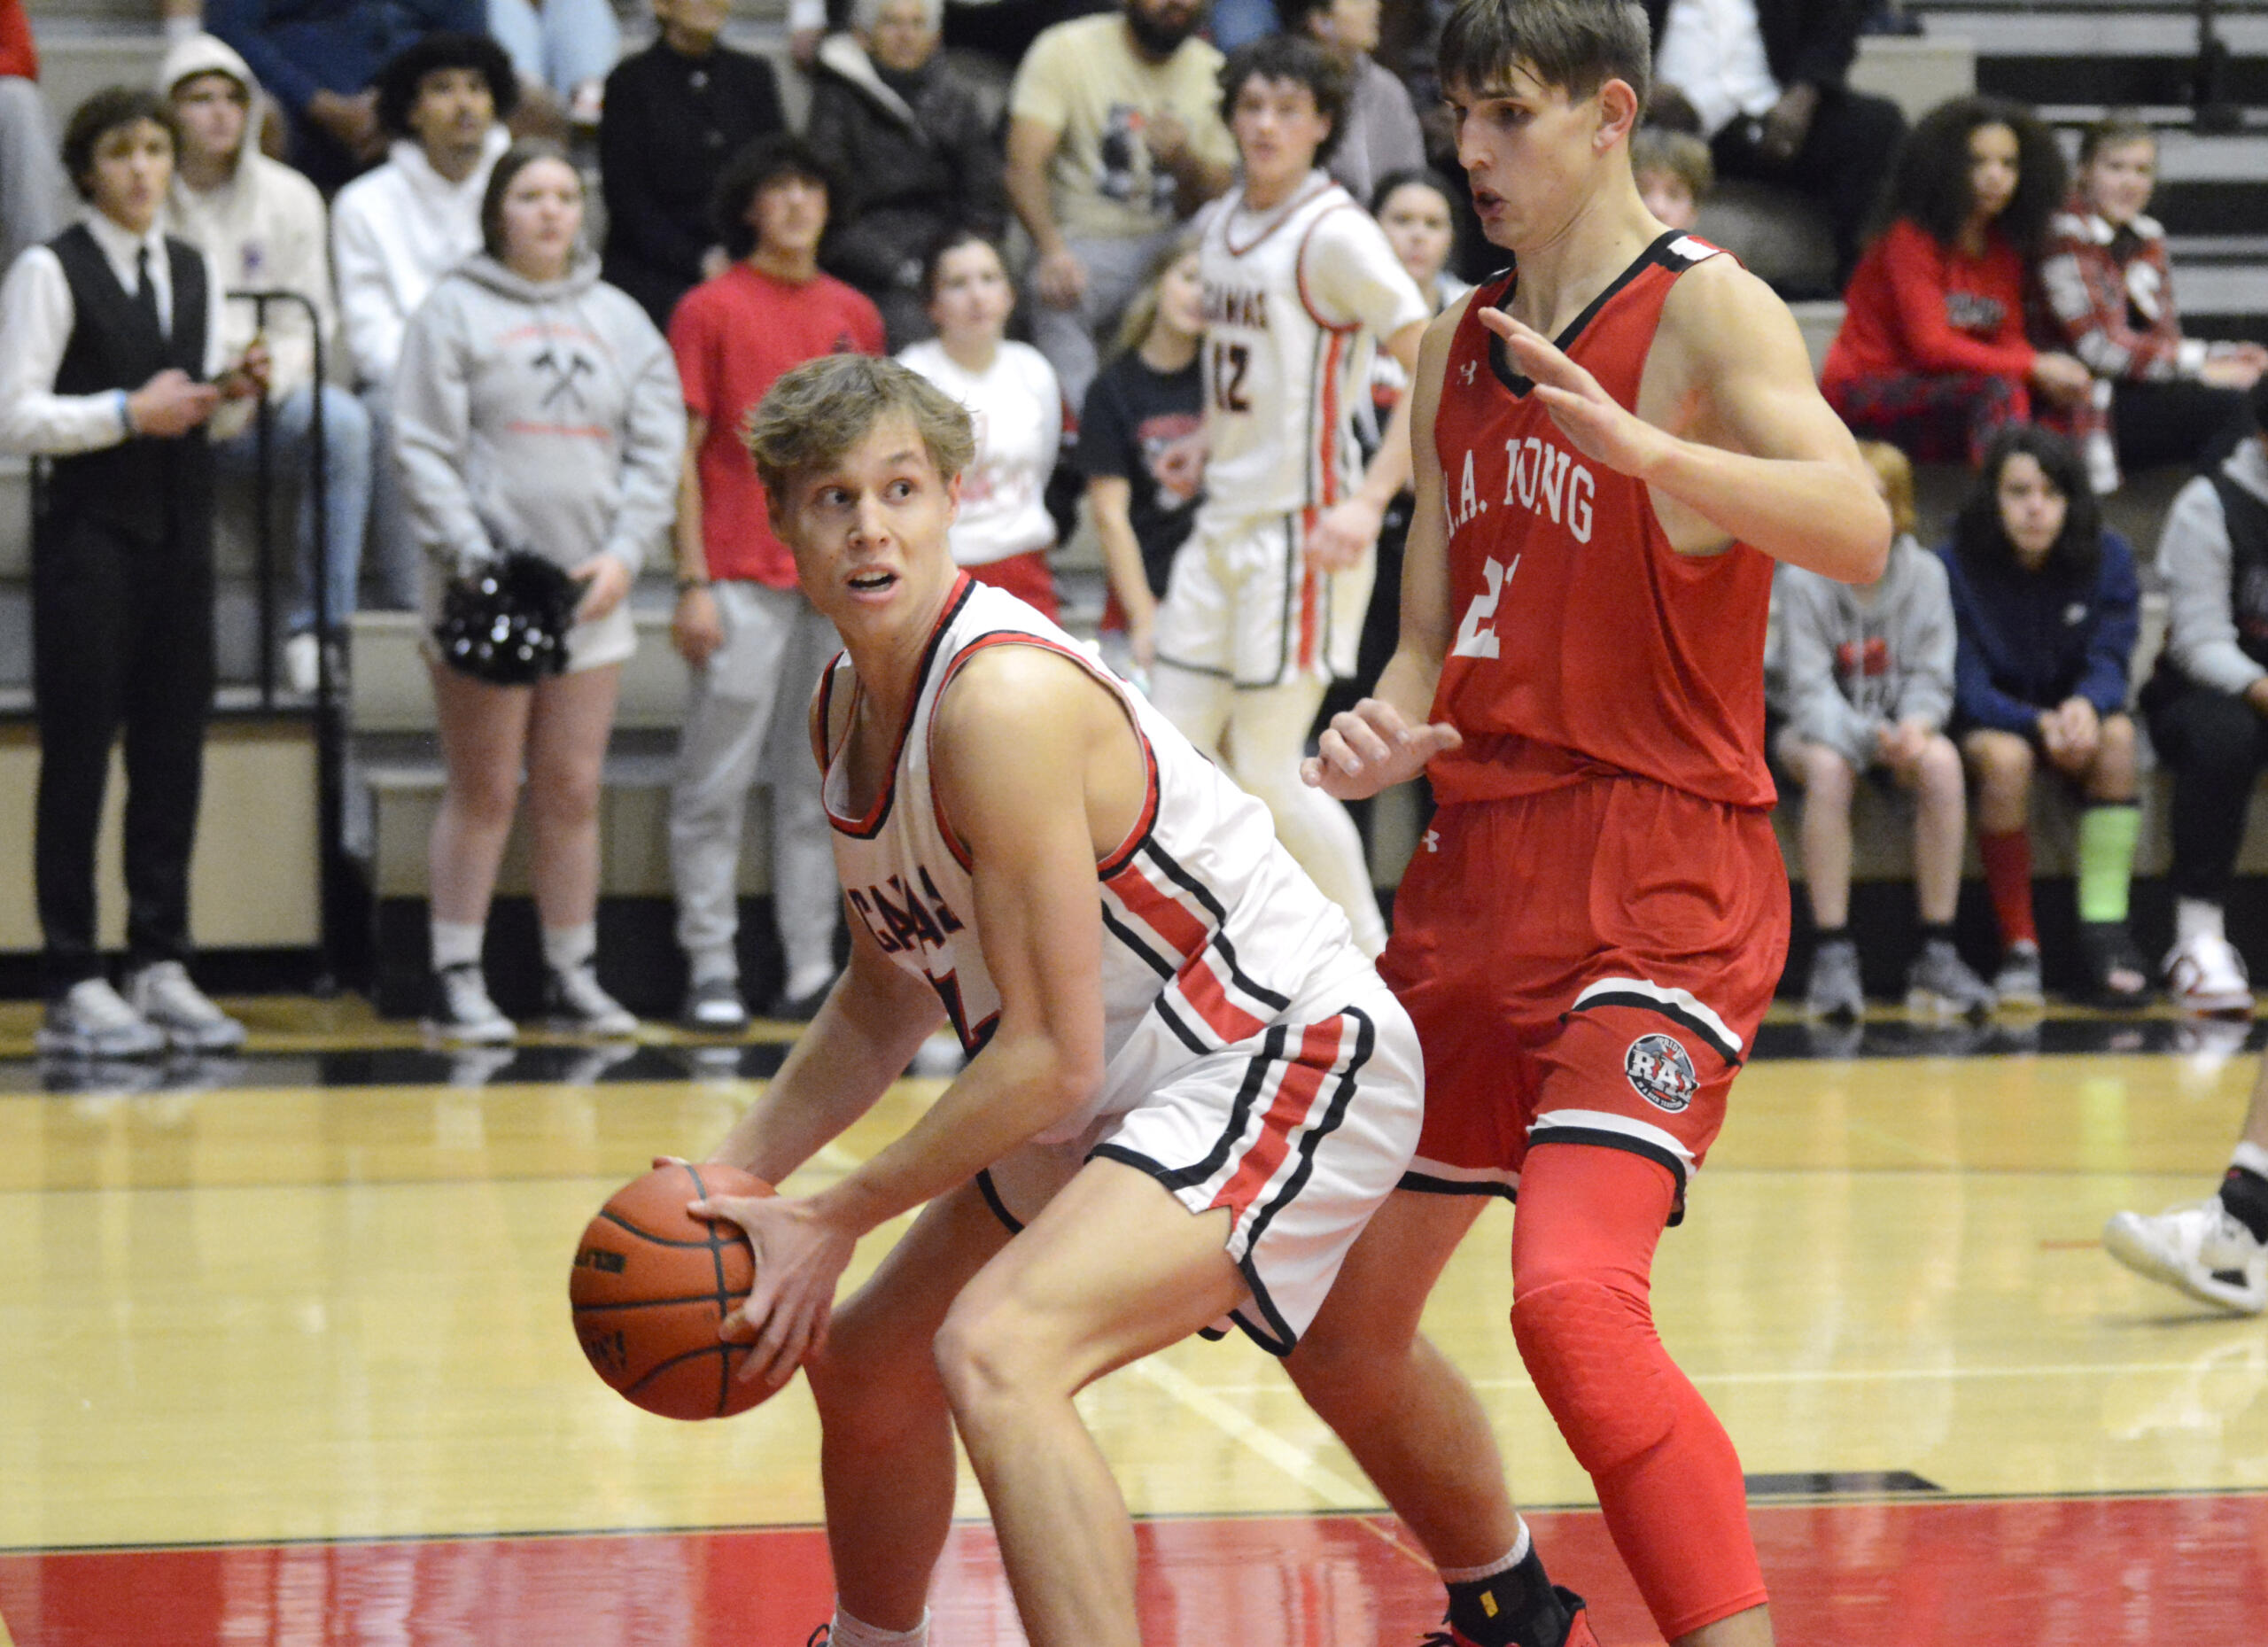 Camas senior center Josh Dabasinskas, left, looks to make a pass out of the post while being defended by R.A. Long’s Jaxson Cook in a non-league boys basketball game on Tuesday, Dec. 13, 2022, at Camas High School.